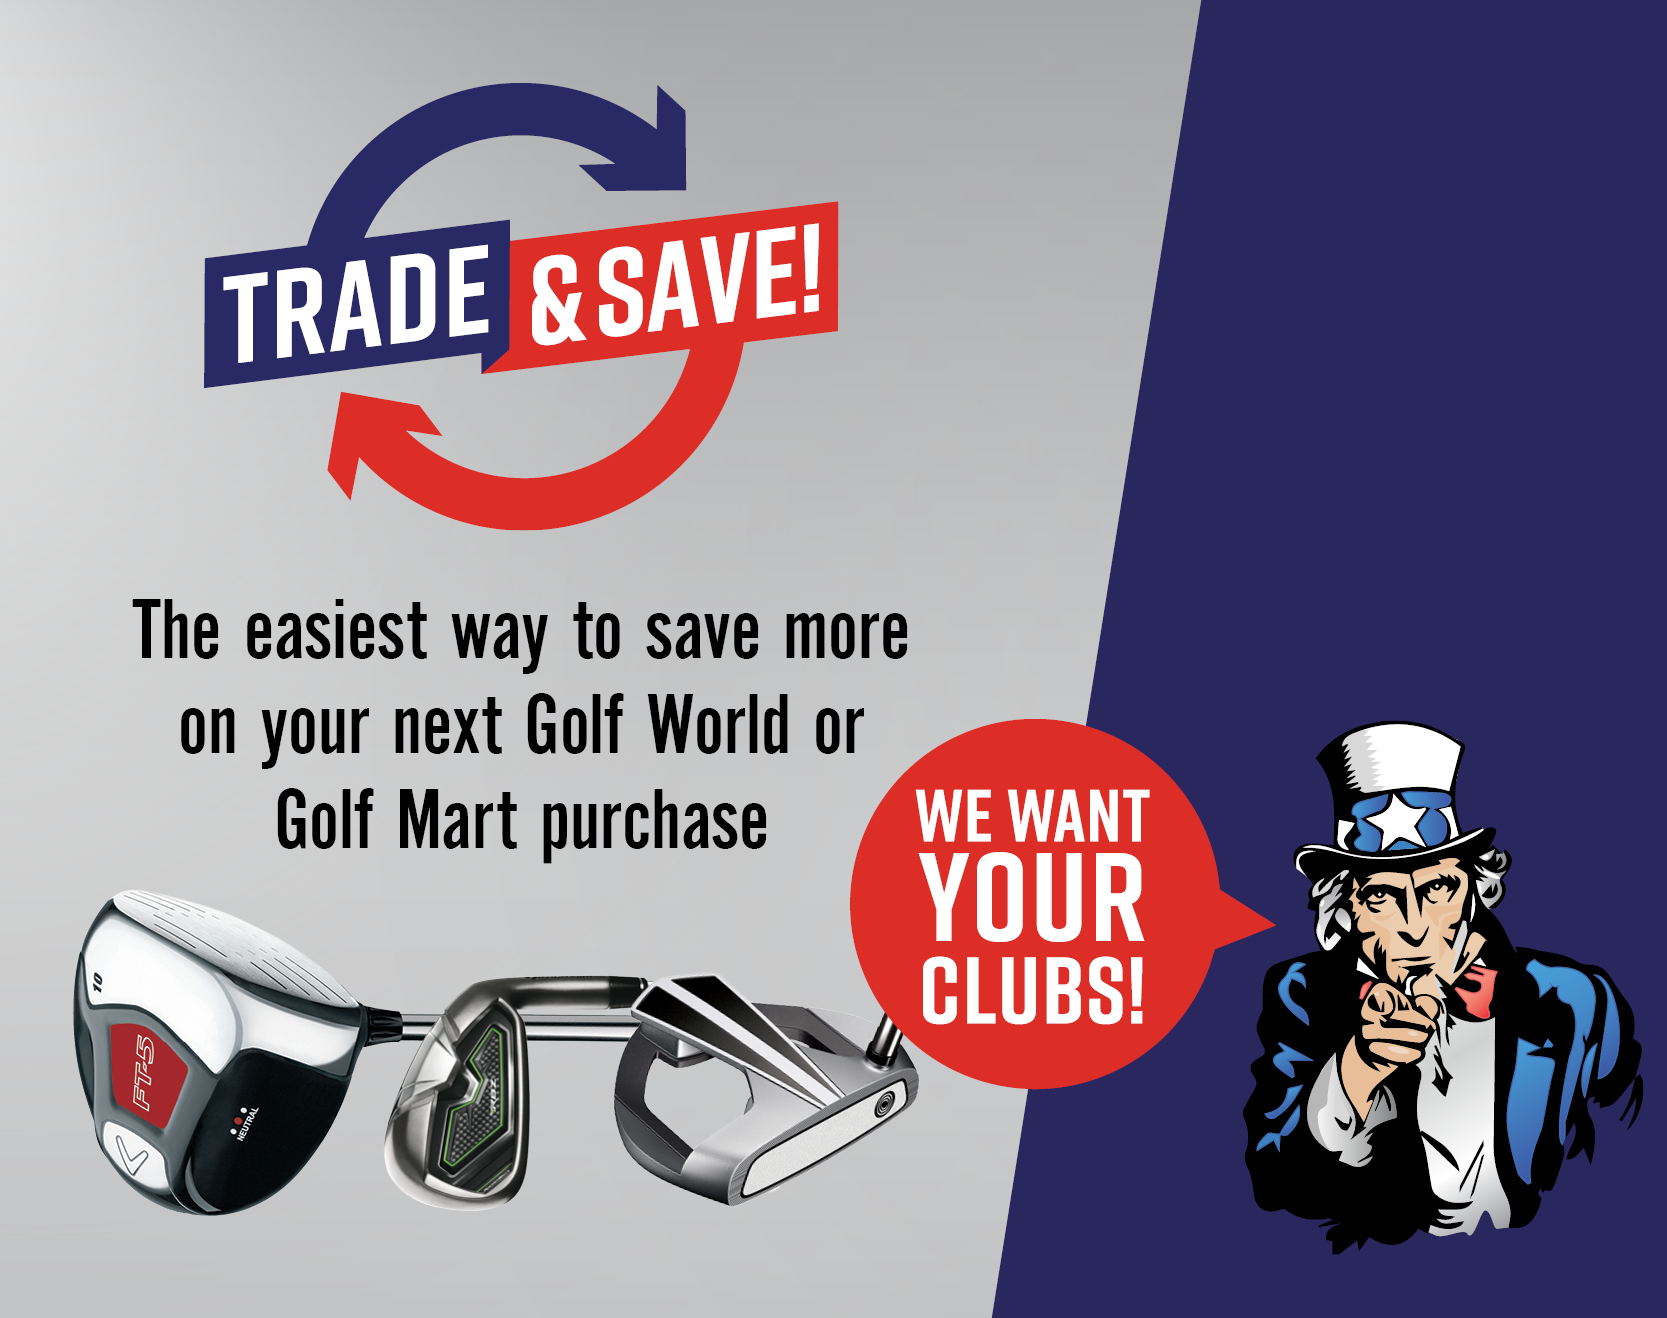 Trade and Save - We want your clubs!